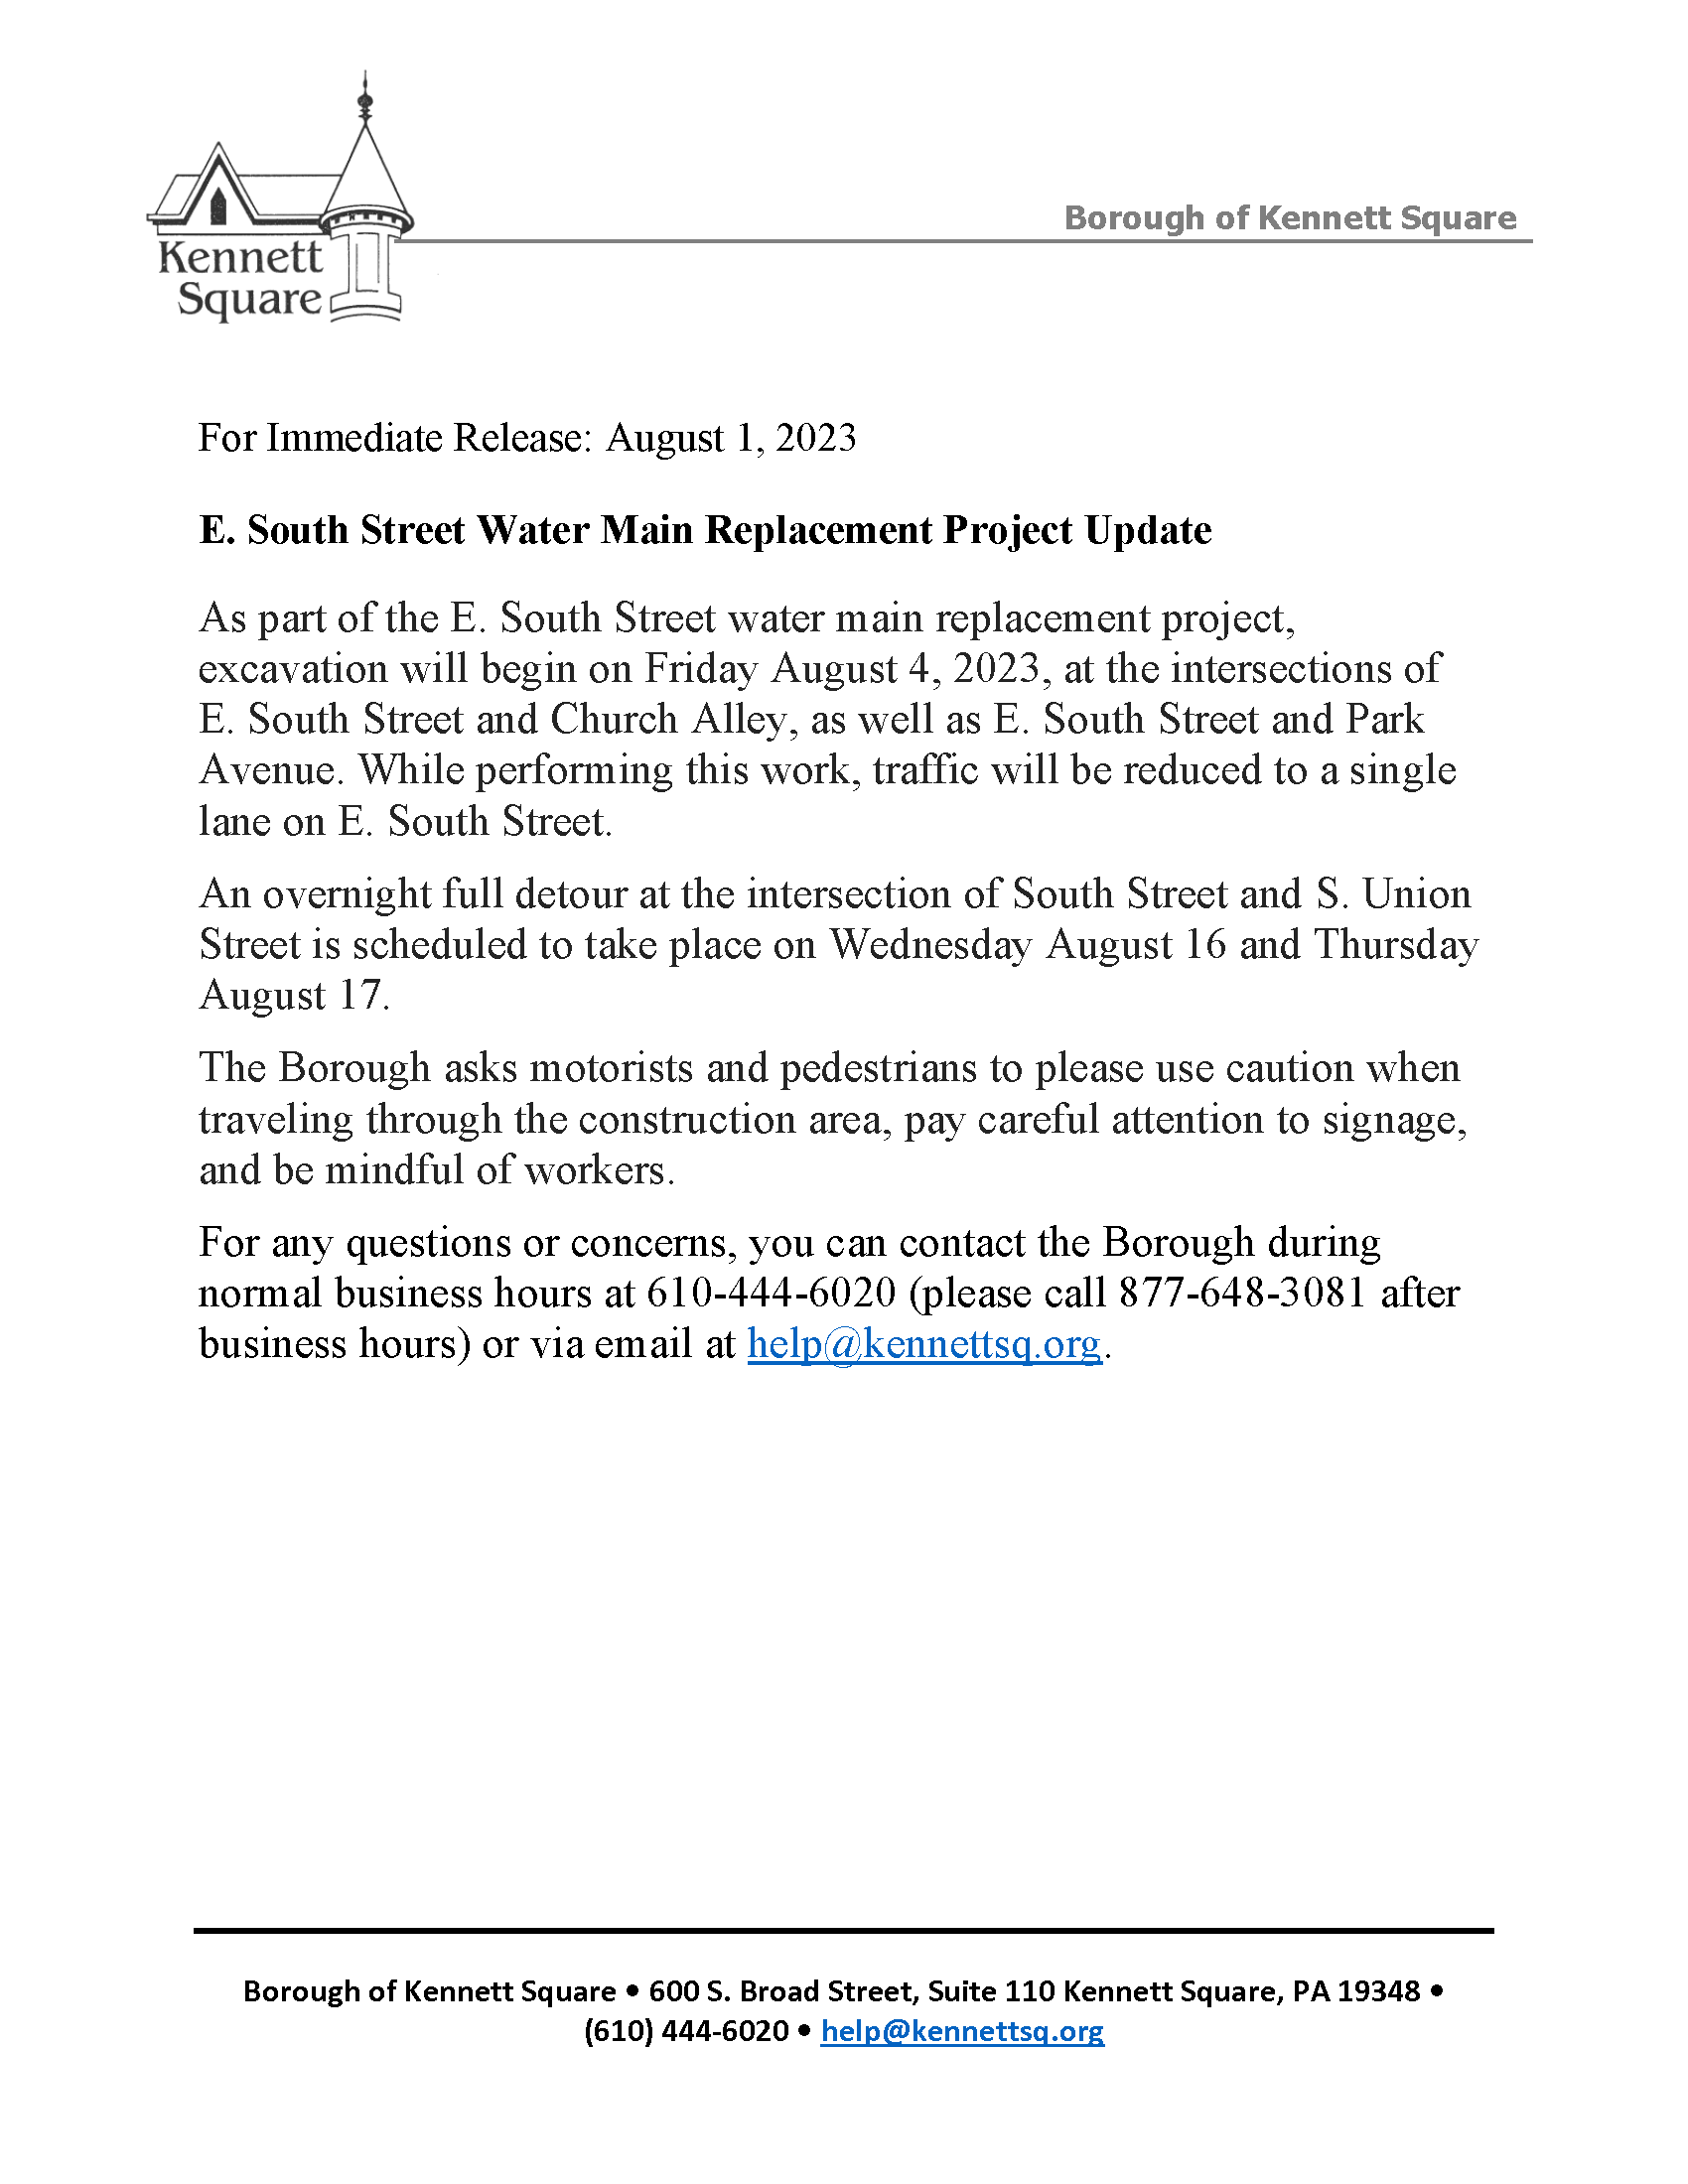 E. South Street Water Main Replacement Project Update